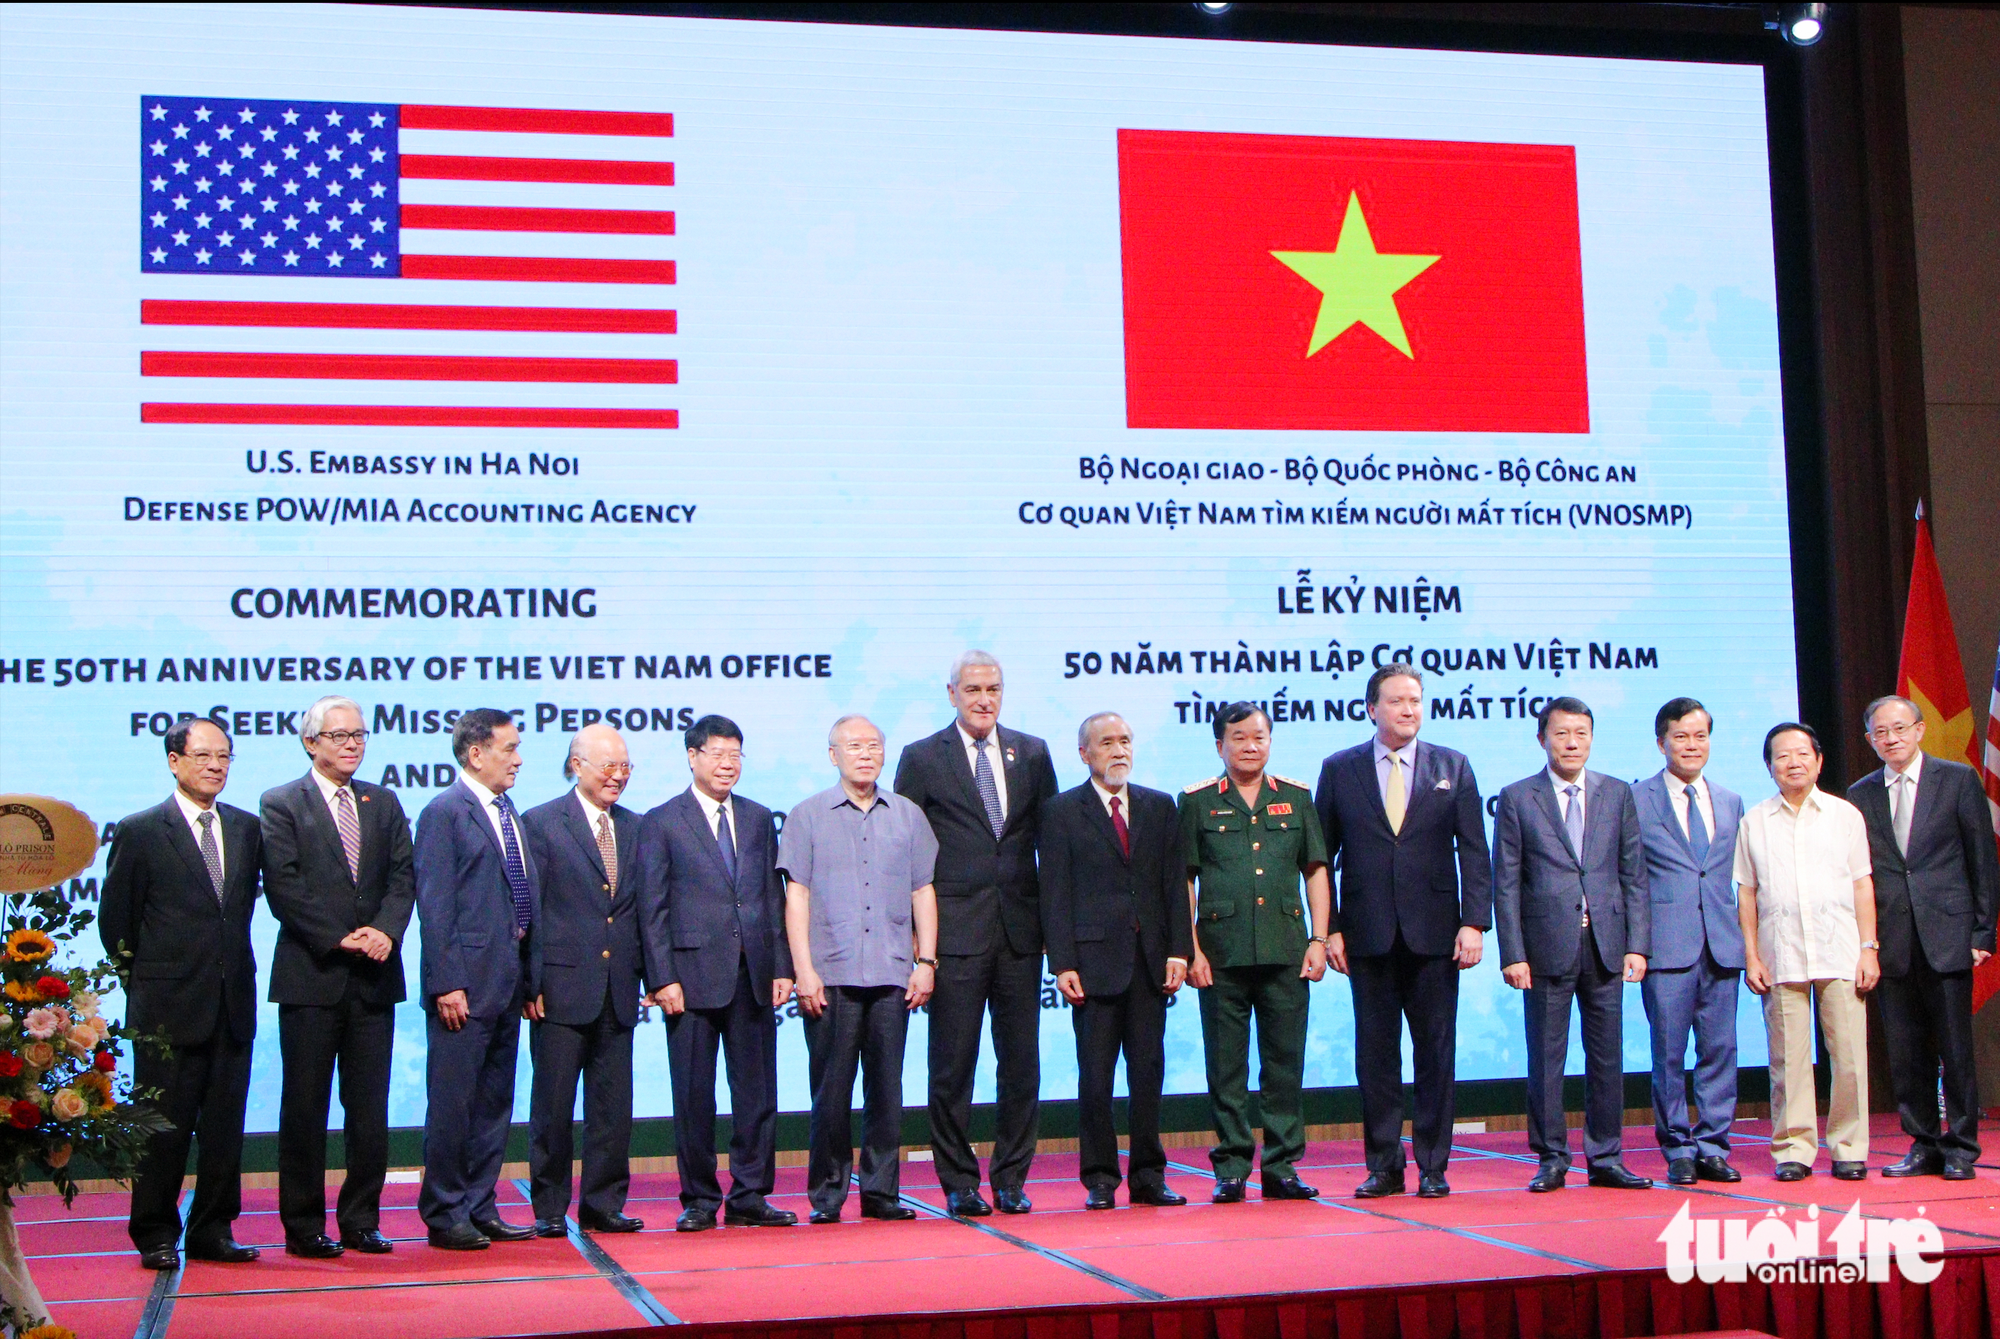 Vietnam Office for Seeking Missing Persons celebrates 50th founding anniversary